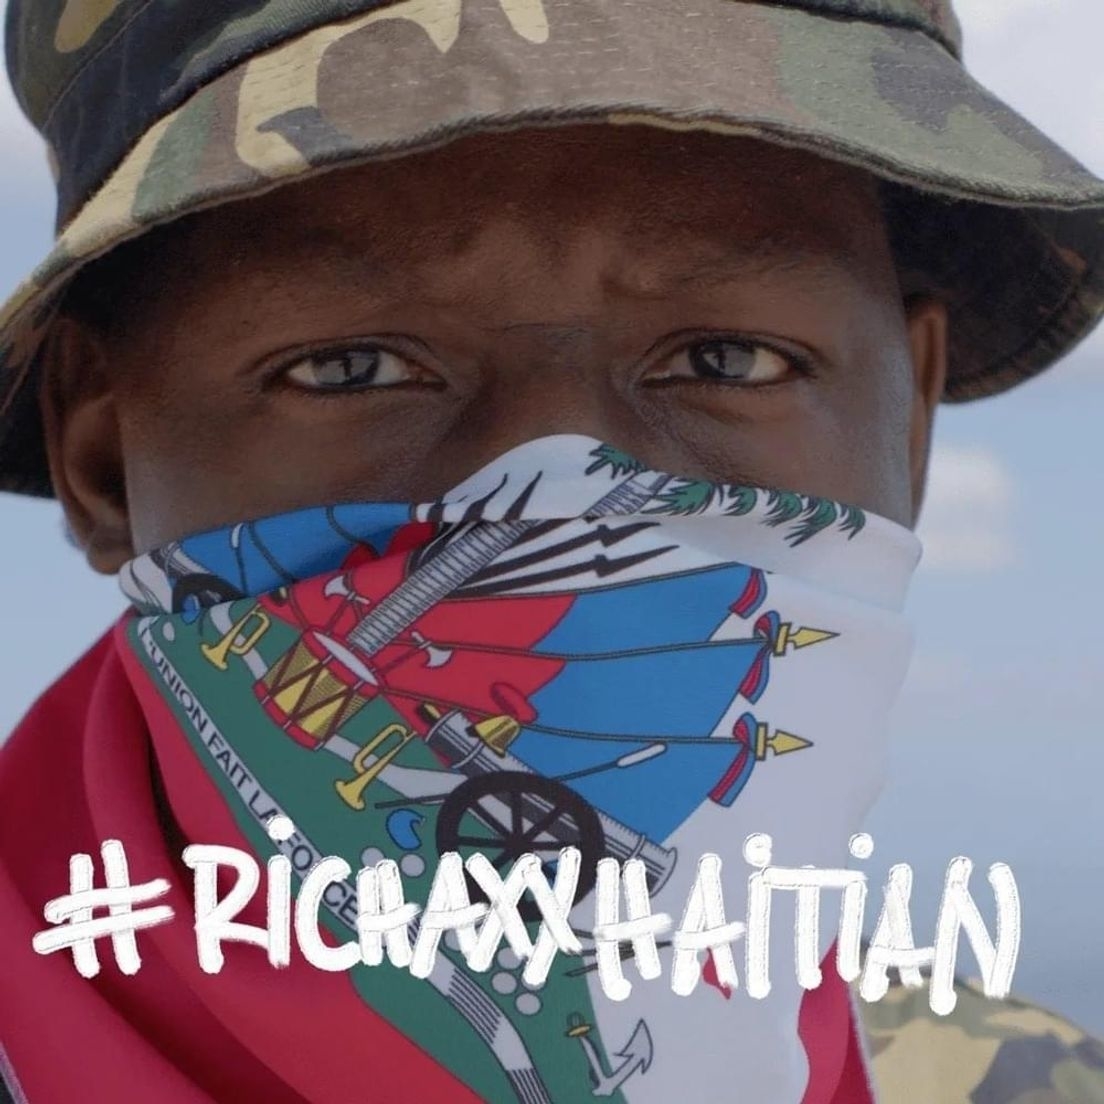 Man wearing a camouflage hat and a bandana with the Haitian flag design over his face. Text overlay says &quot;#RICHAXXHAITIAN.&quot;